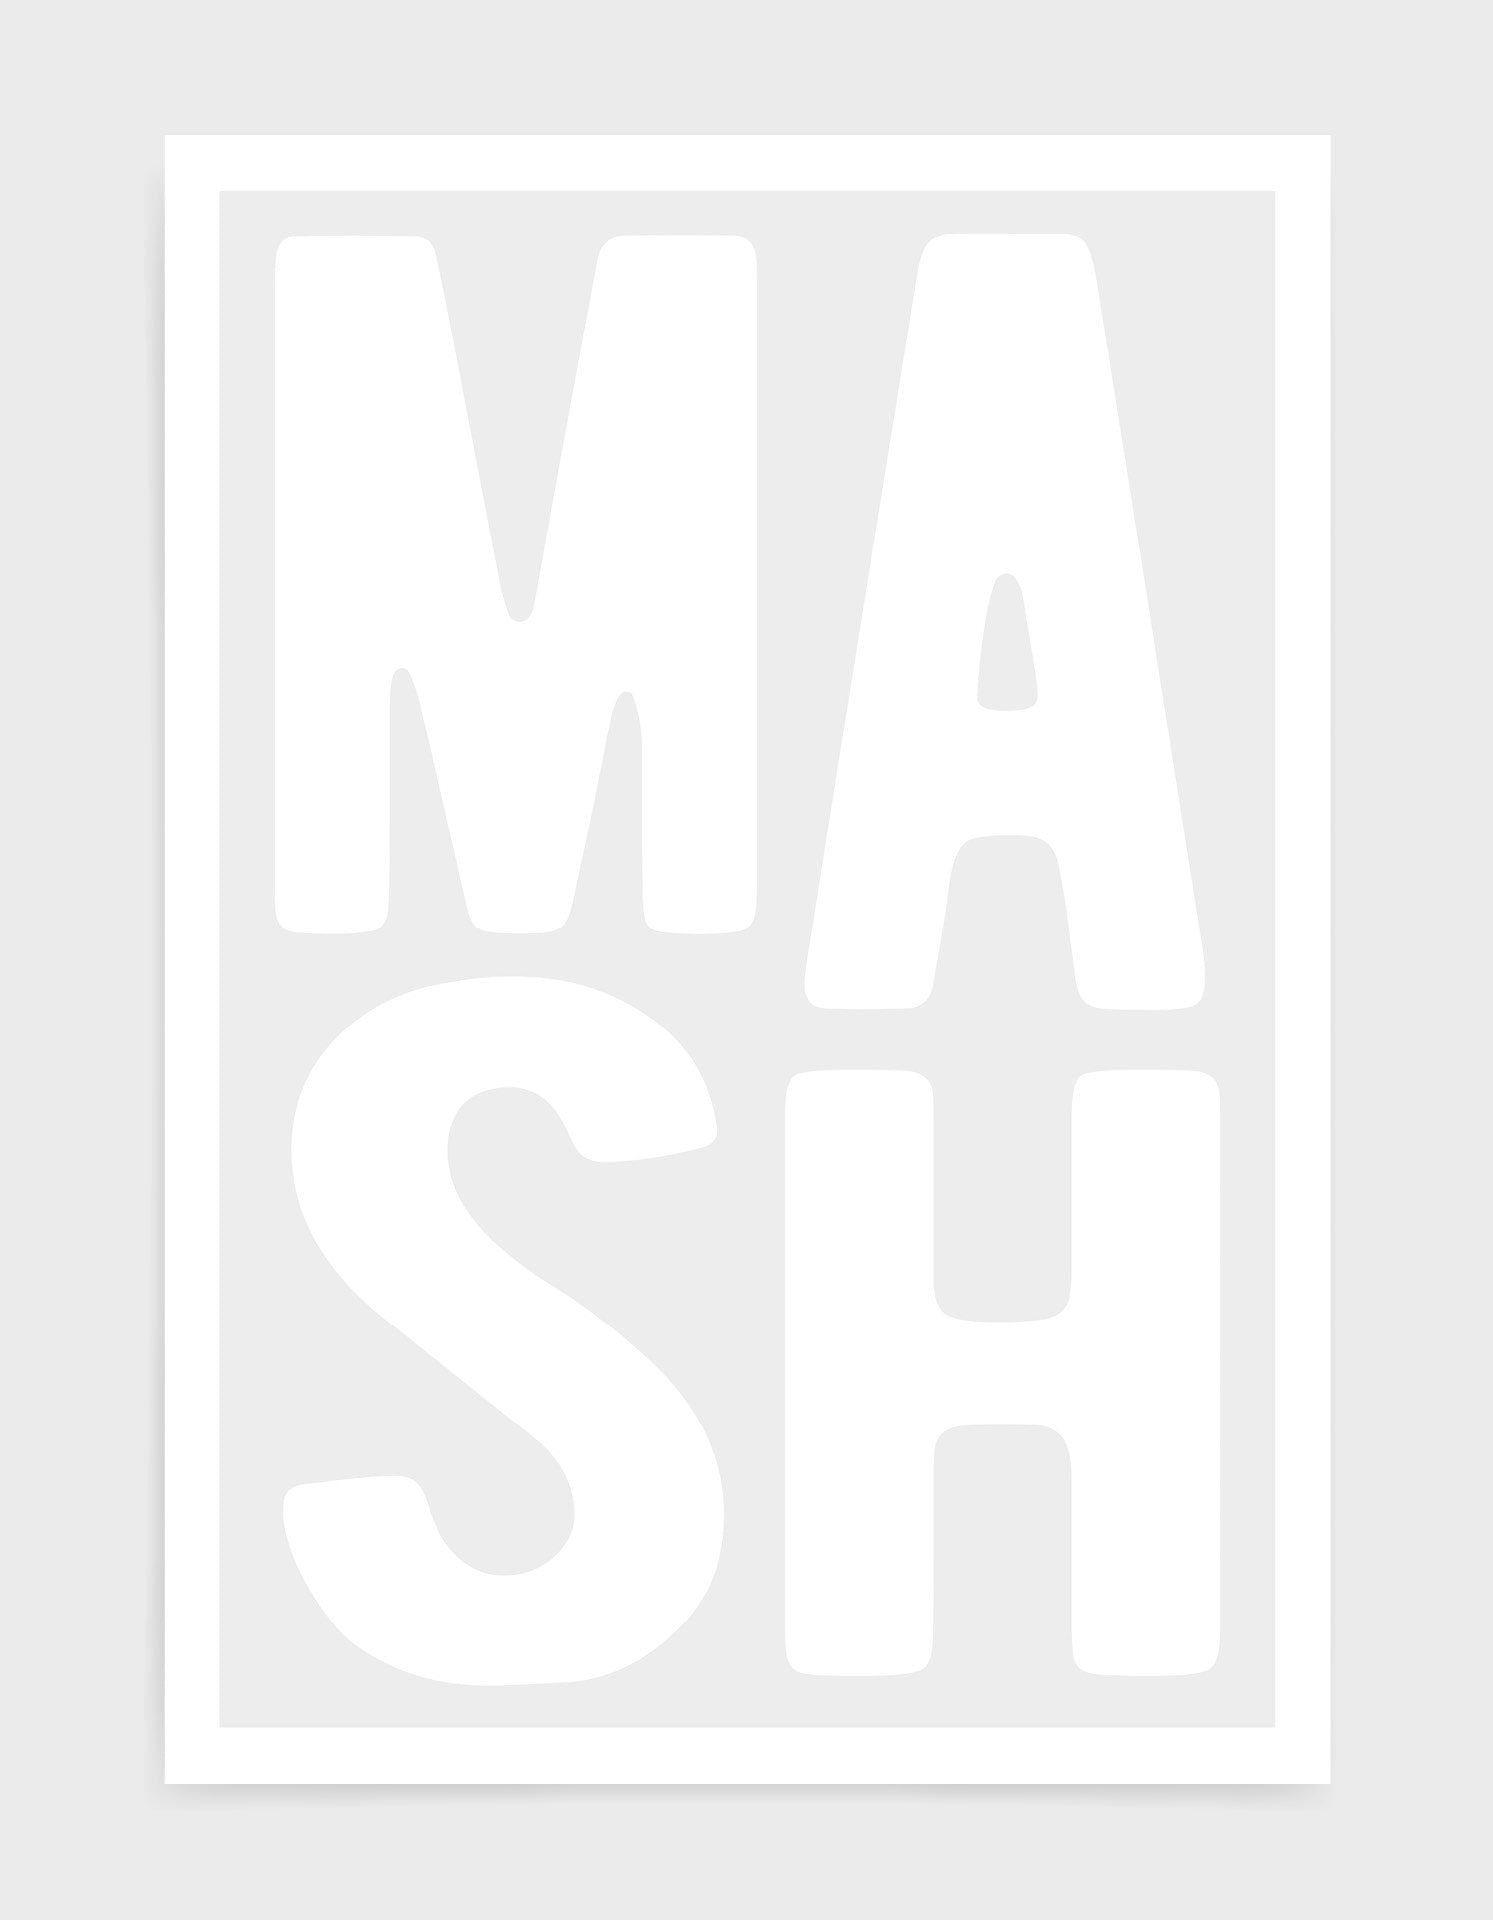 monochrome typography print of the word MASH in white font on a light grey background